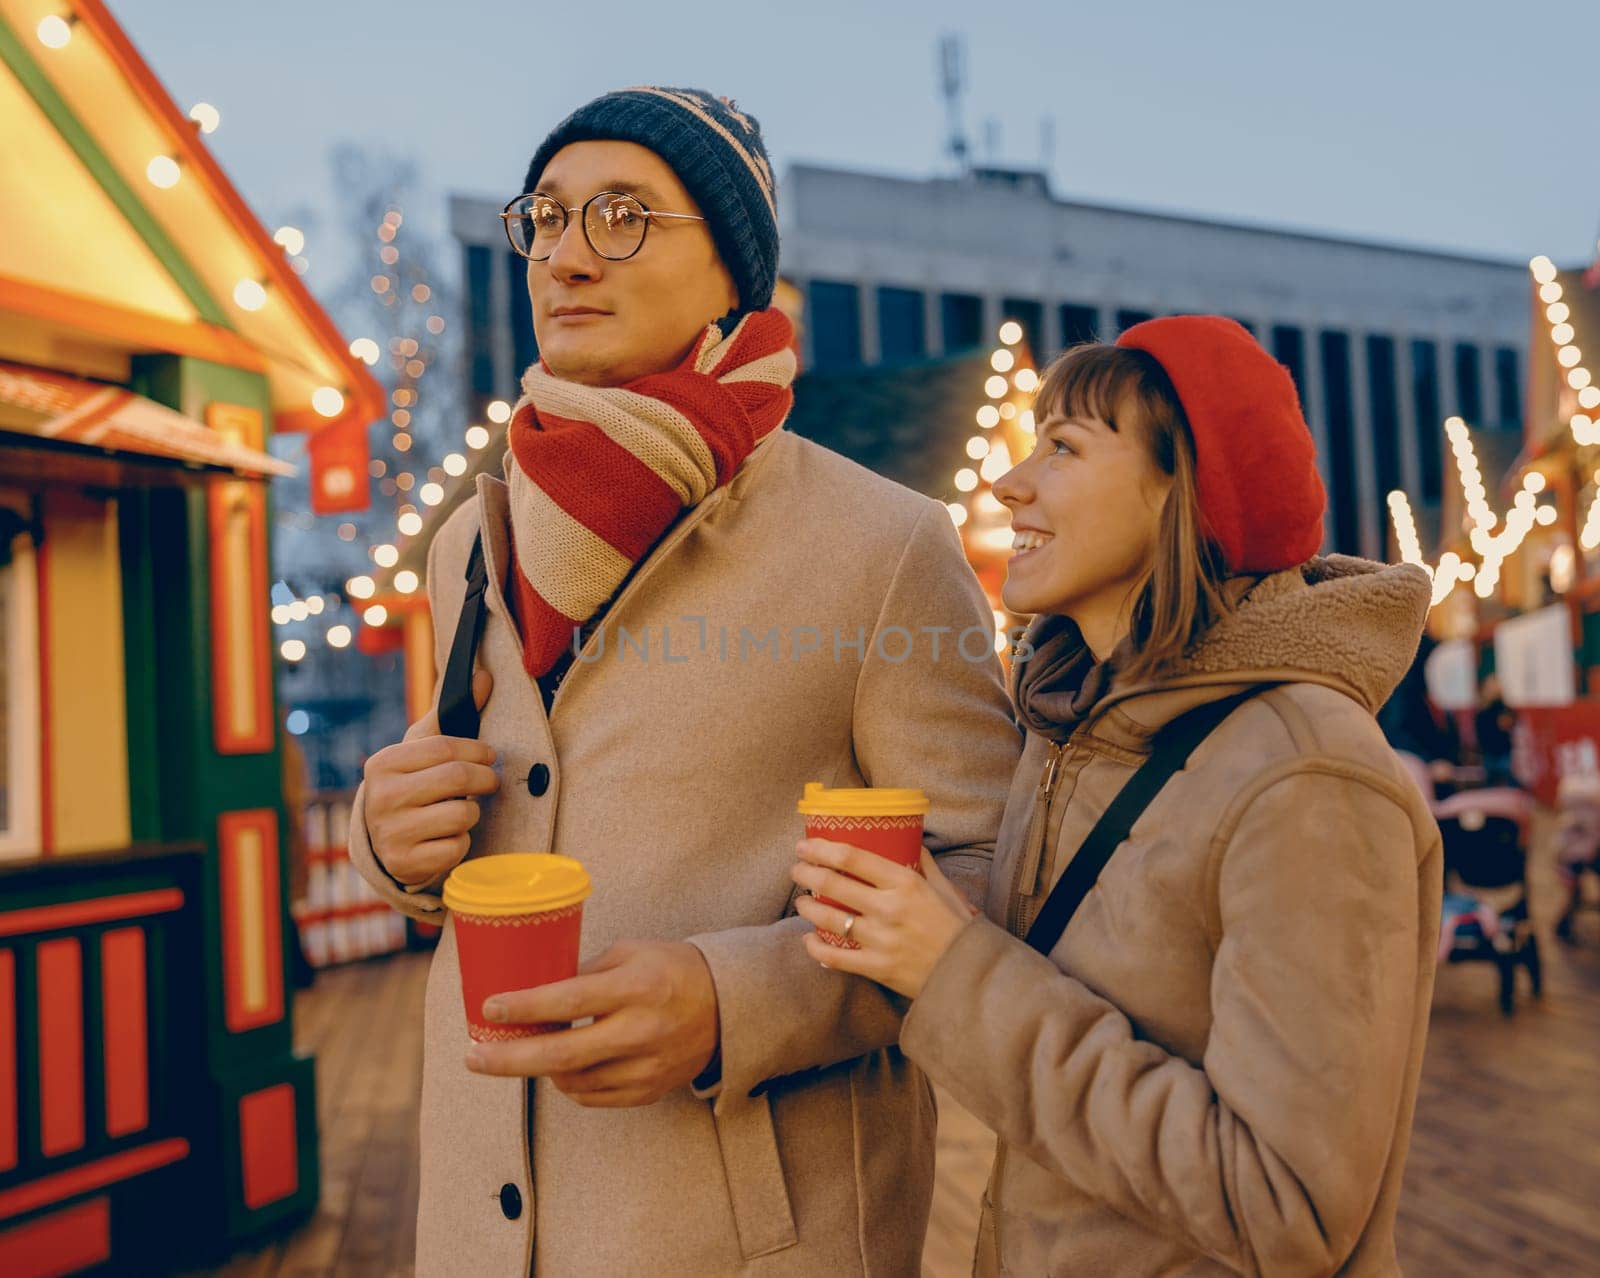 A couple stands close, holding warm drinks in a brightly lit Christmas market, with the woman looking up at her partner in a moment of shared contentment